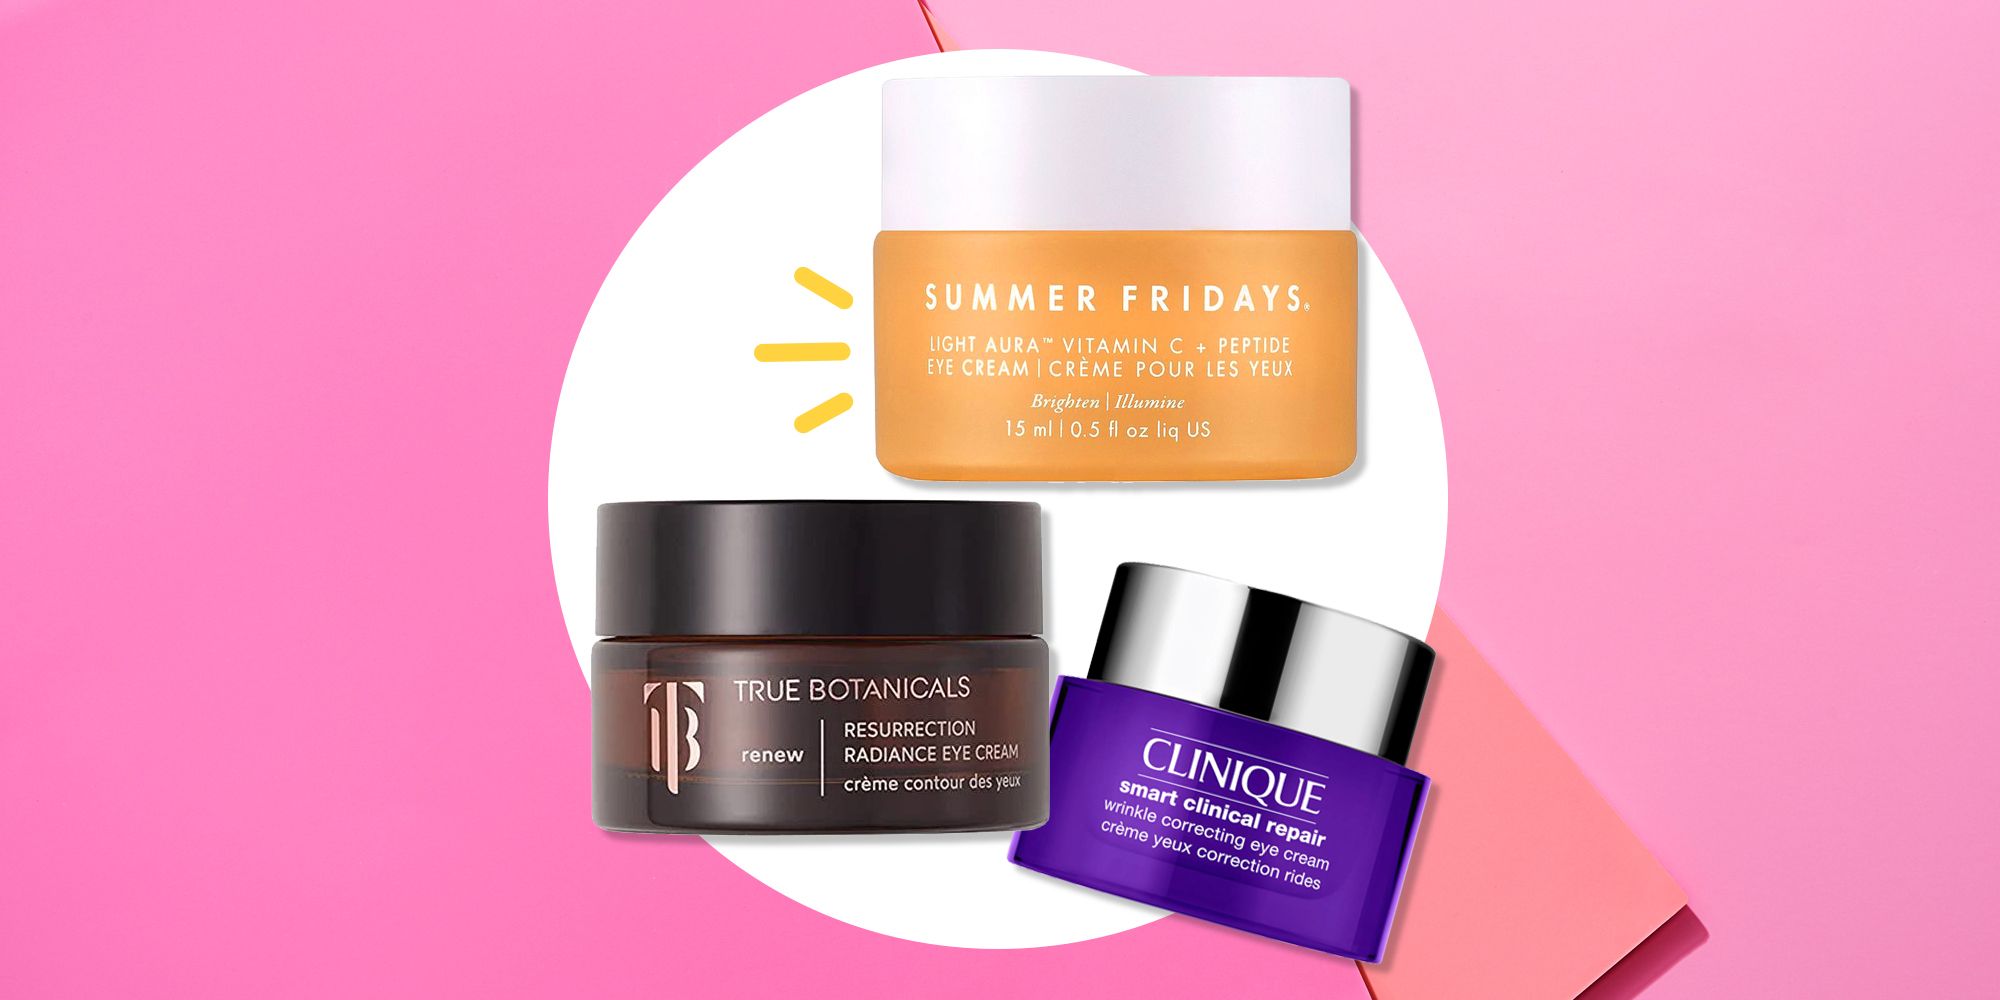 These Eye Creams Will Kick Your Crow's Feet To The Curb